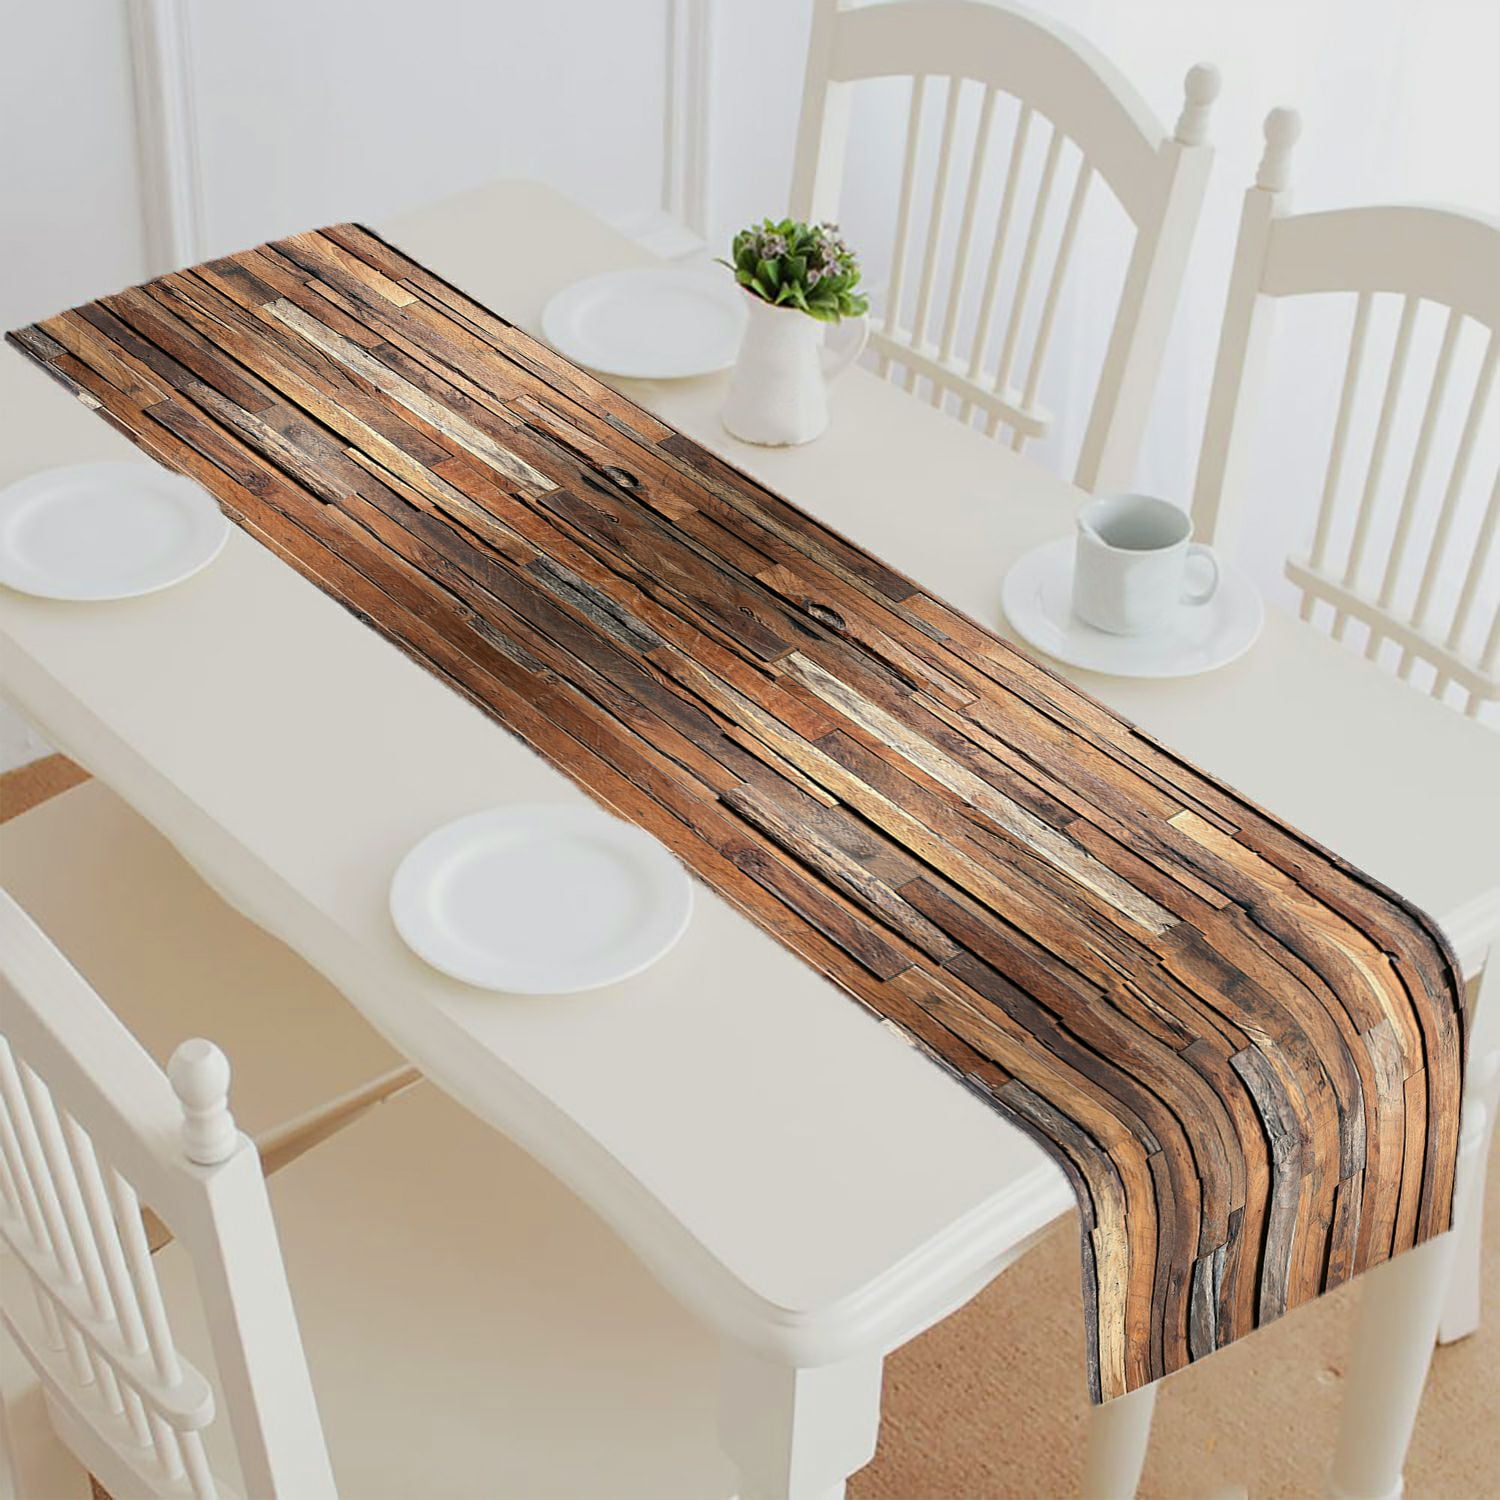 ABPHQTO Timber Wood Wall Table Runner Placemat Tablecloth For Home ...